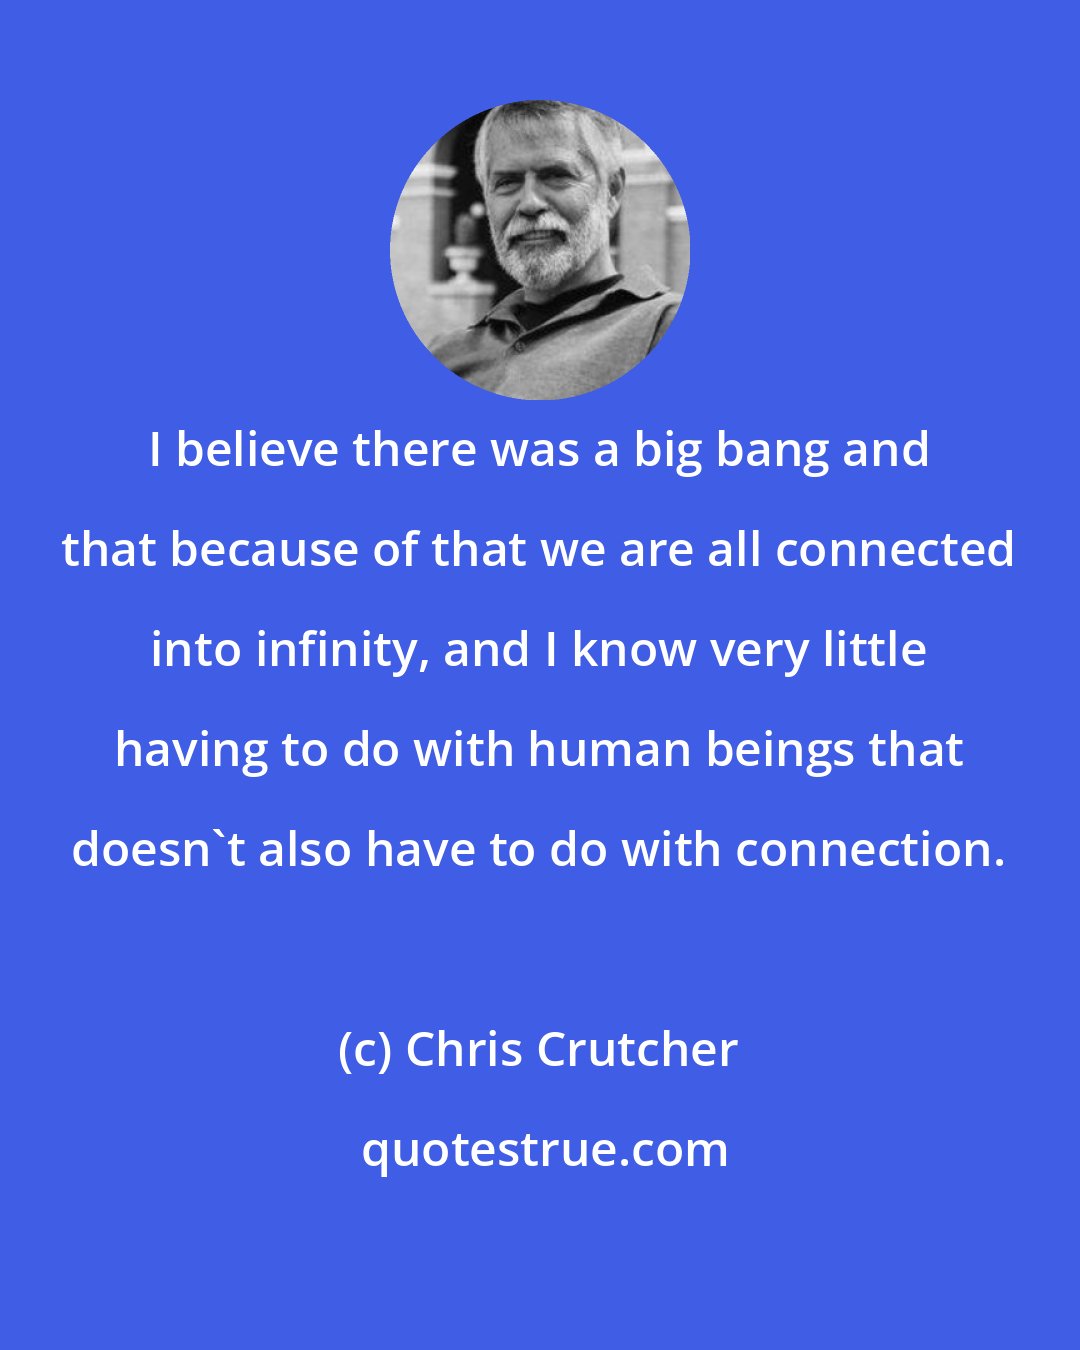 Chris Crutcher: I believe there was a big bang and that because of that we are all connected into infinity, and I know very little having to do with human beings that doesn't also have to do with connection.